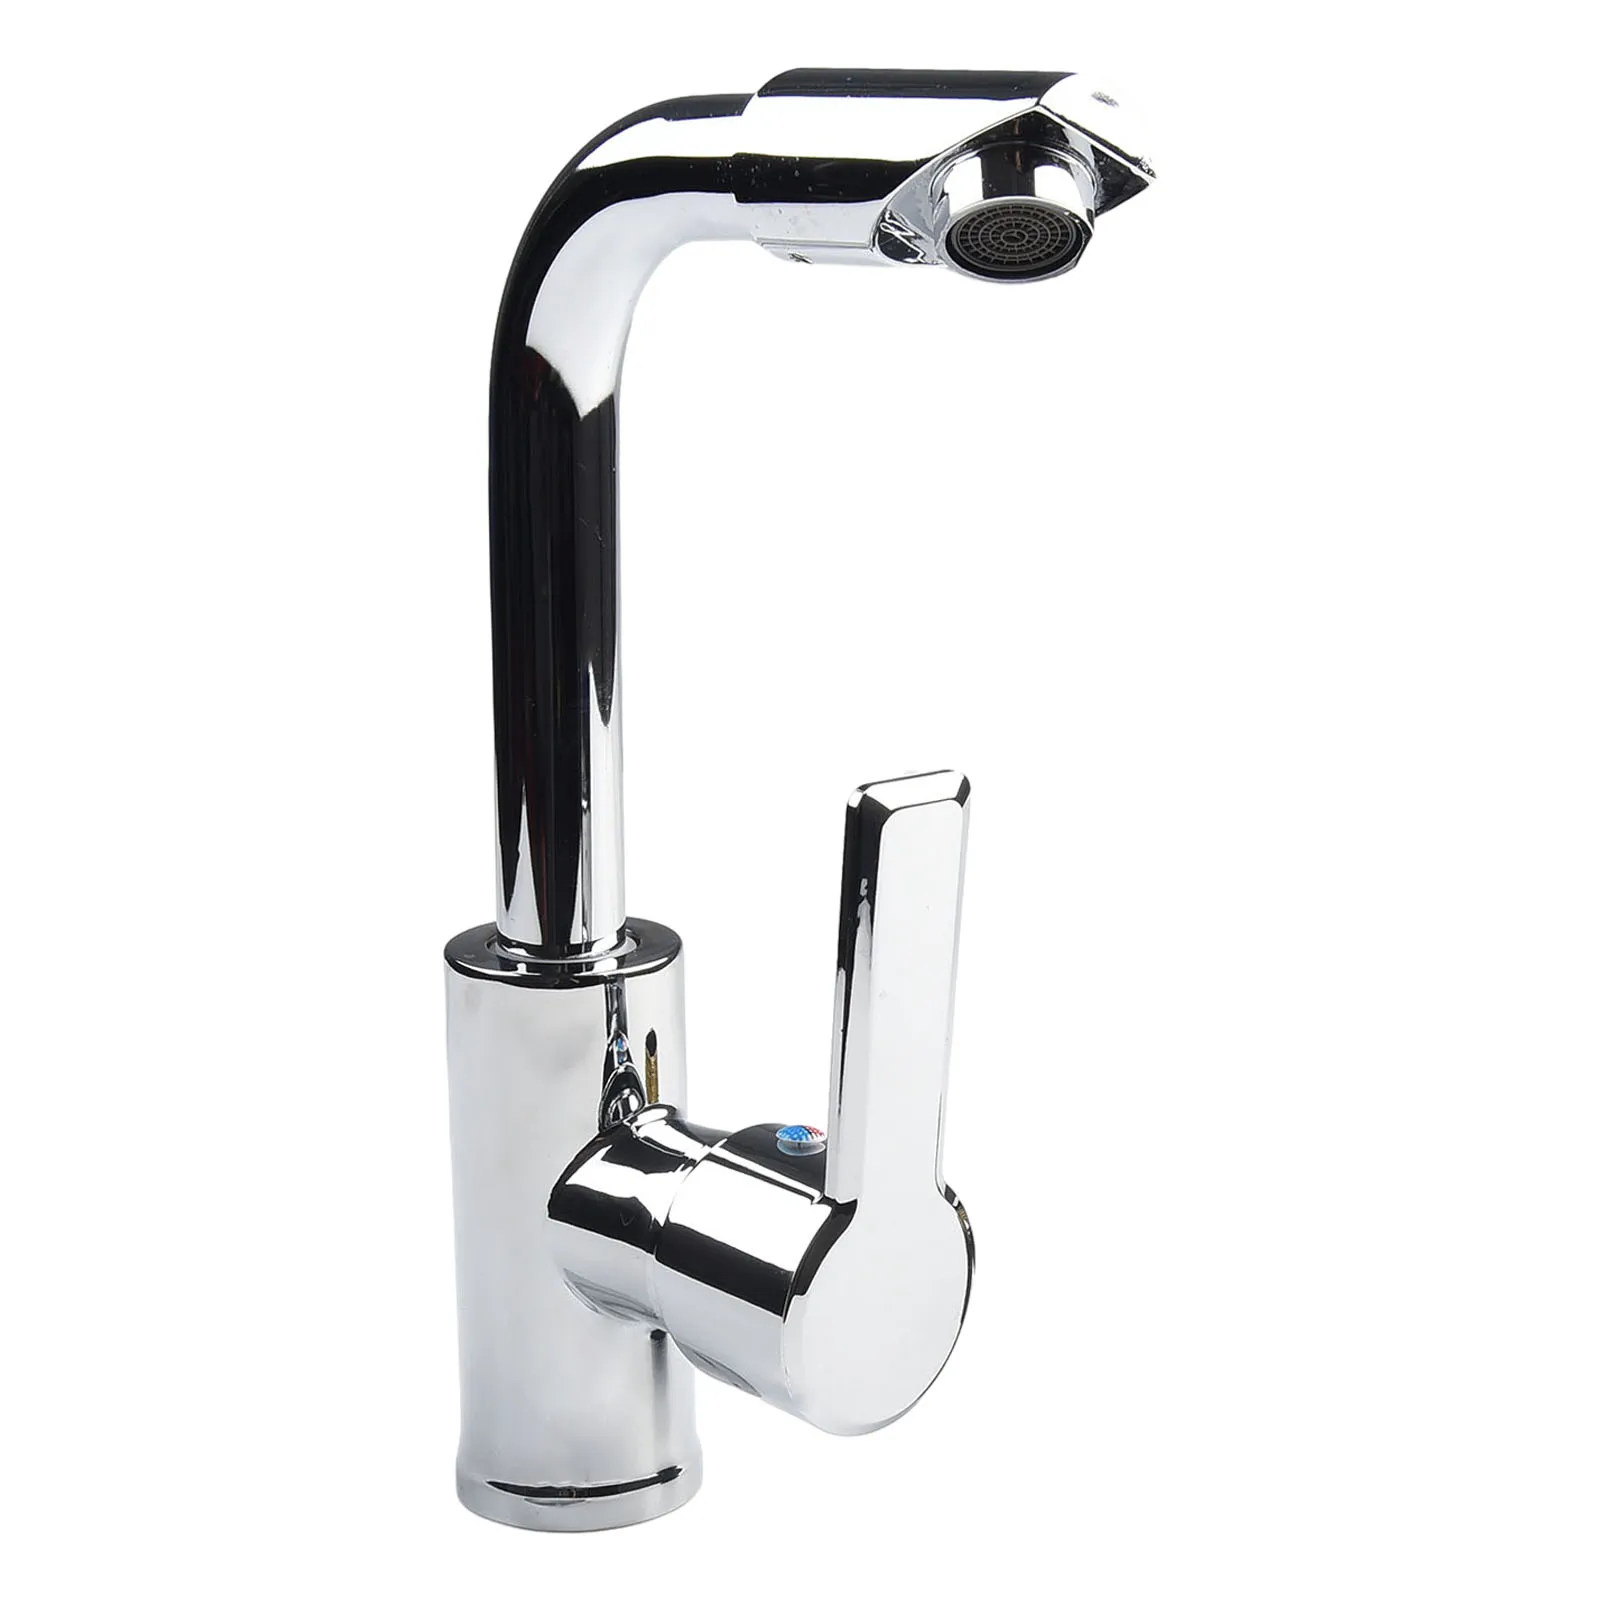 

Stainless Steel Faucet Kitchen Sink Water Tap Hot And Cold Mixer Bathroom Basin Faucet Single Handle Household Swivel Spout Tap